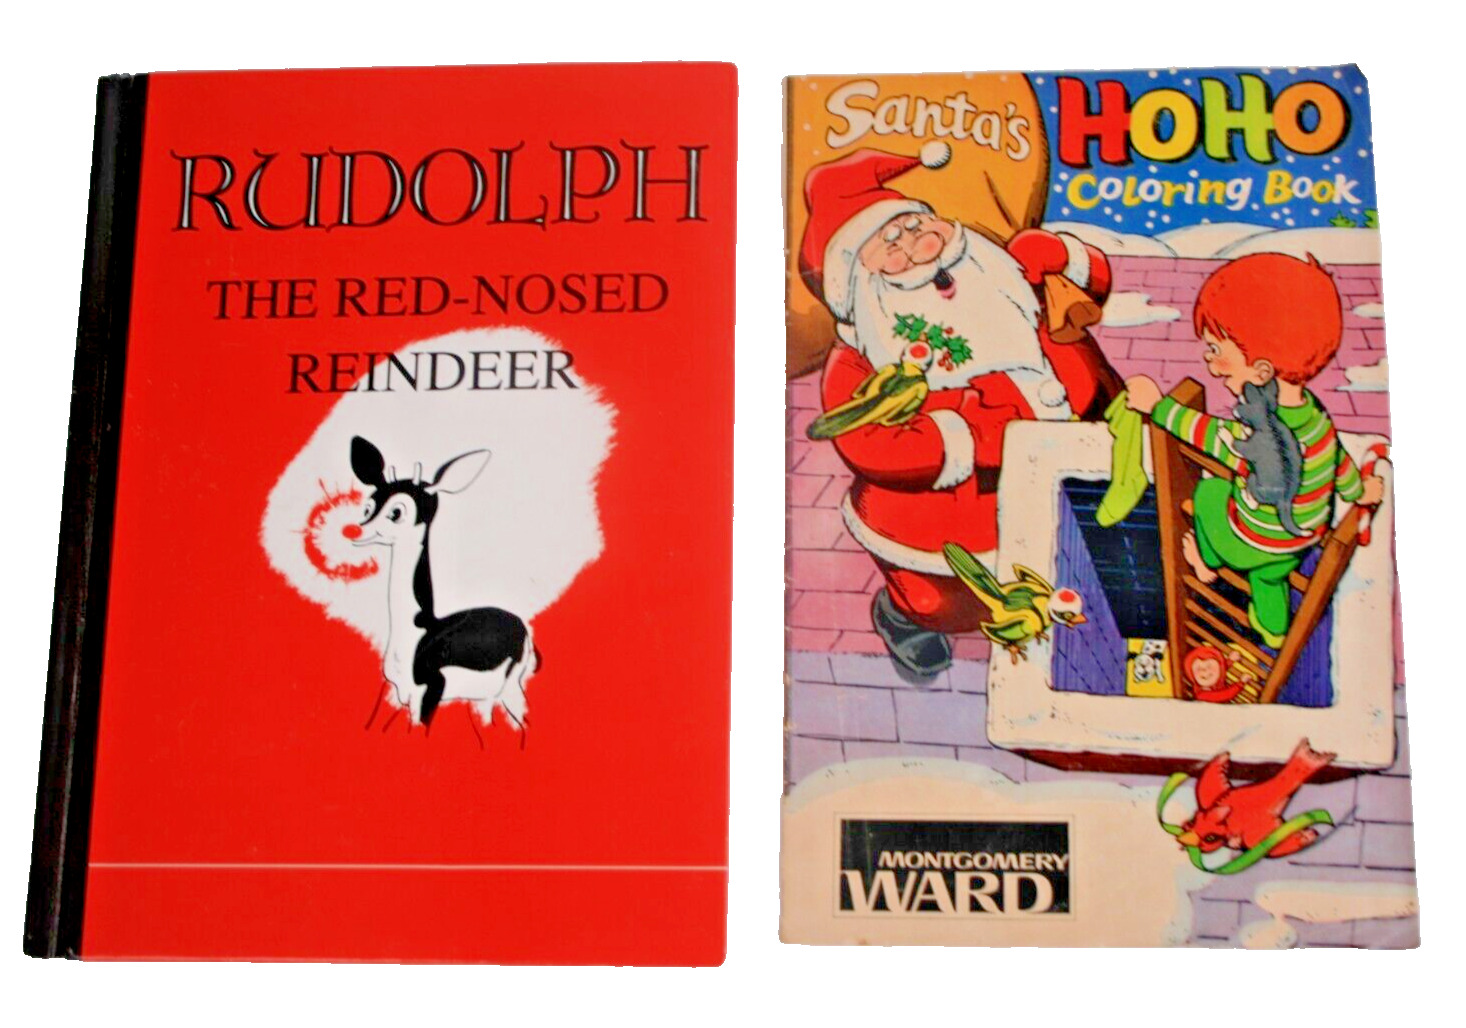 Montgomery Wards Advertising Santa's Ho Ho Coloring & Rudolph Red-Nosed Reindeer